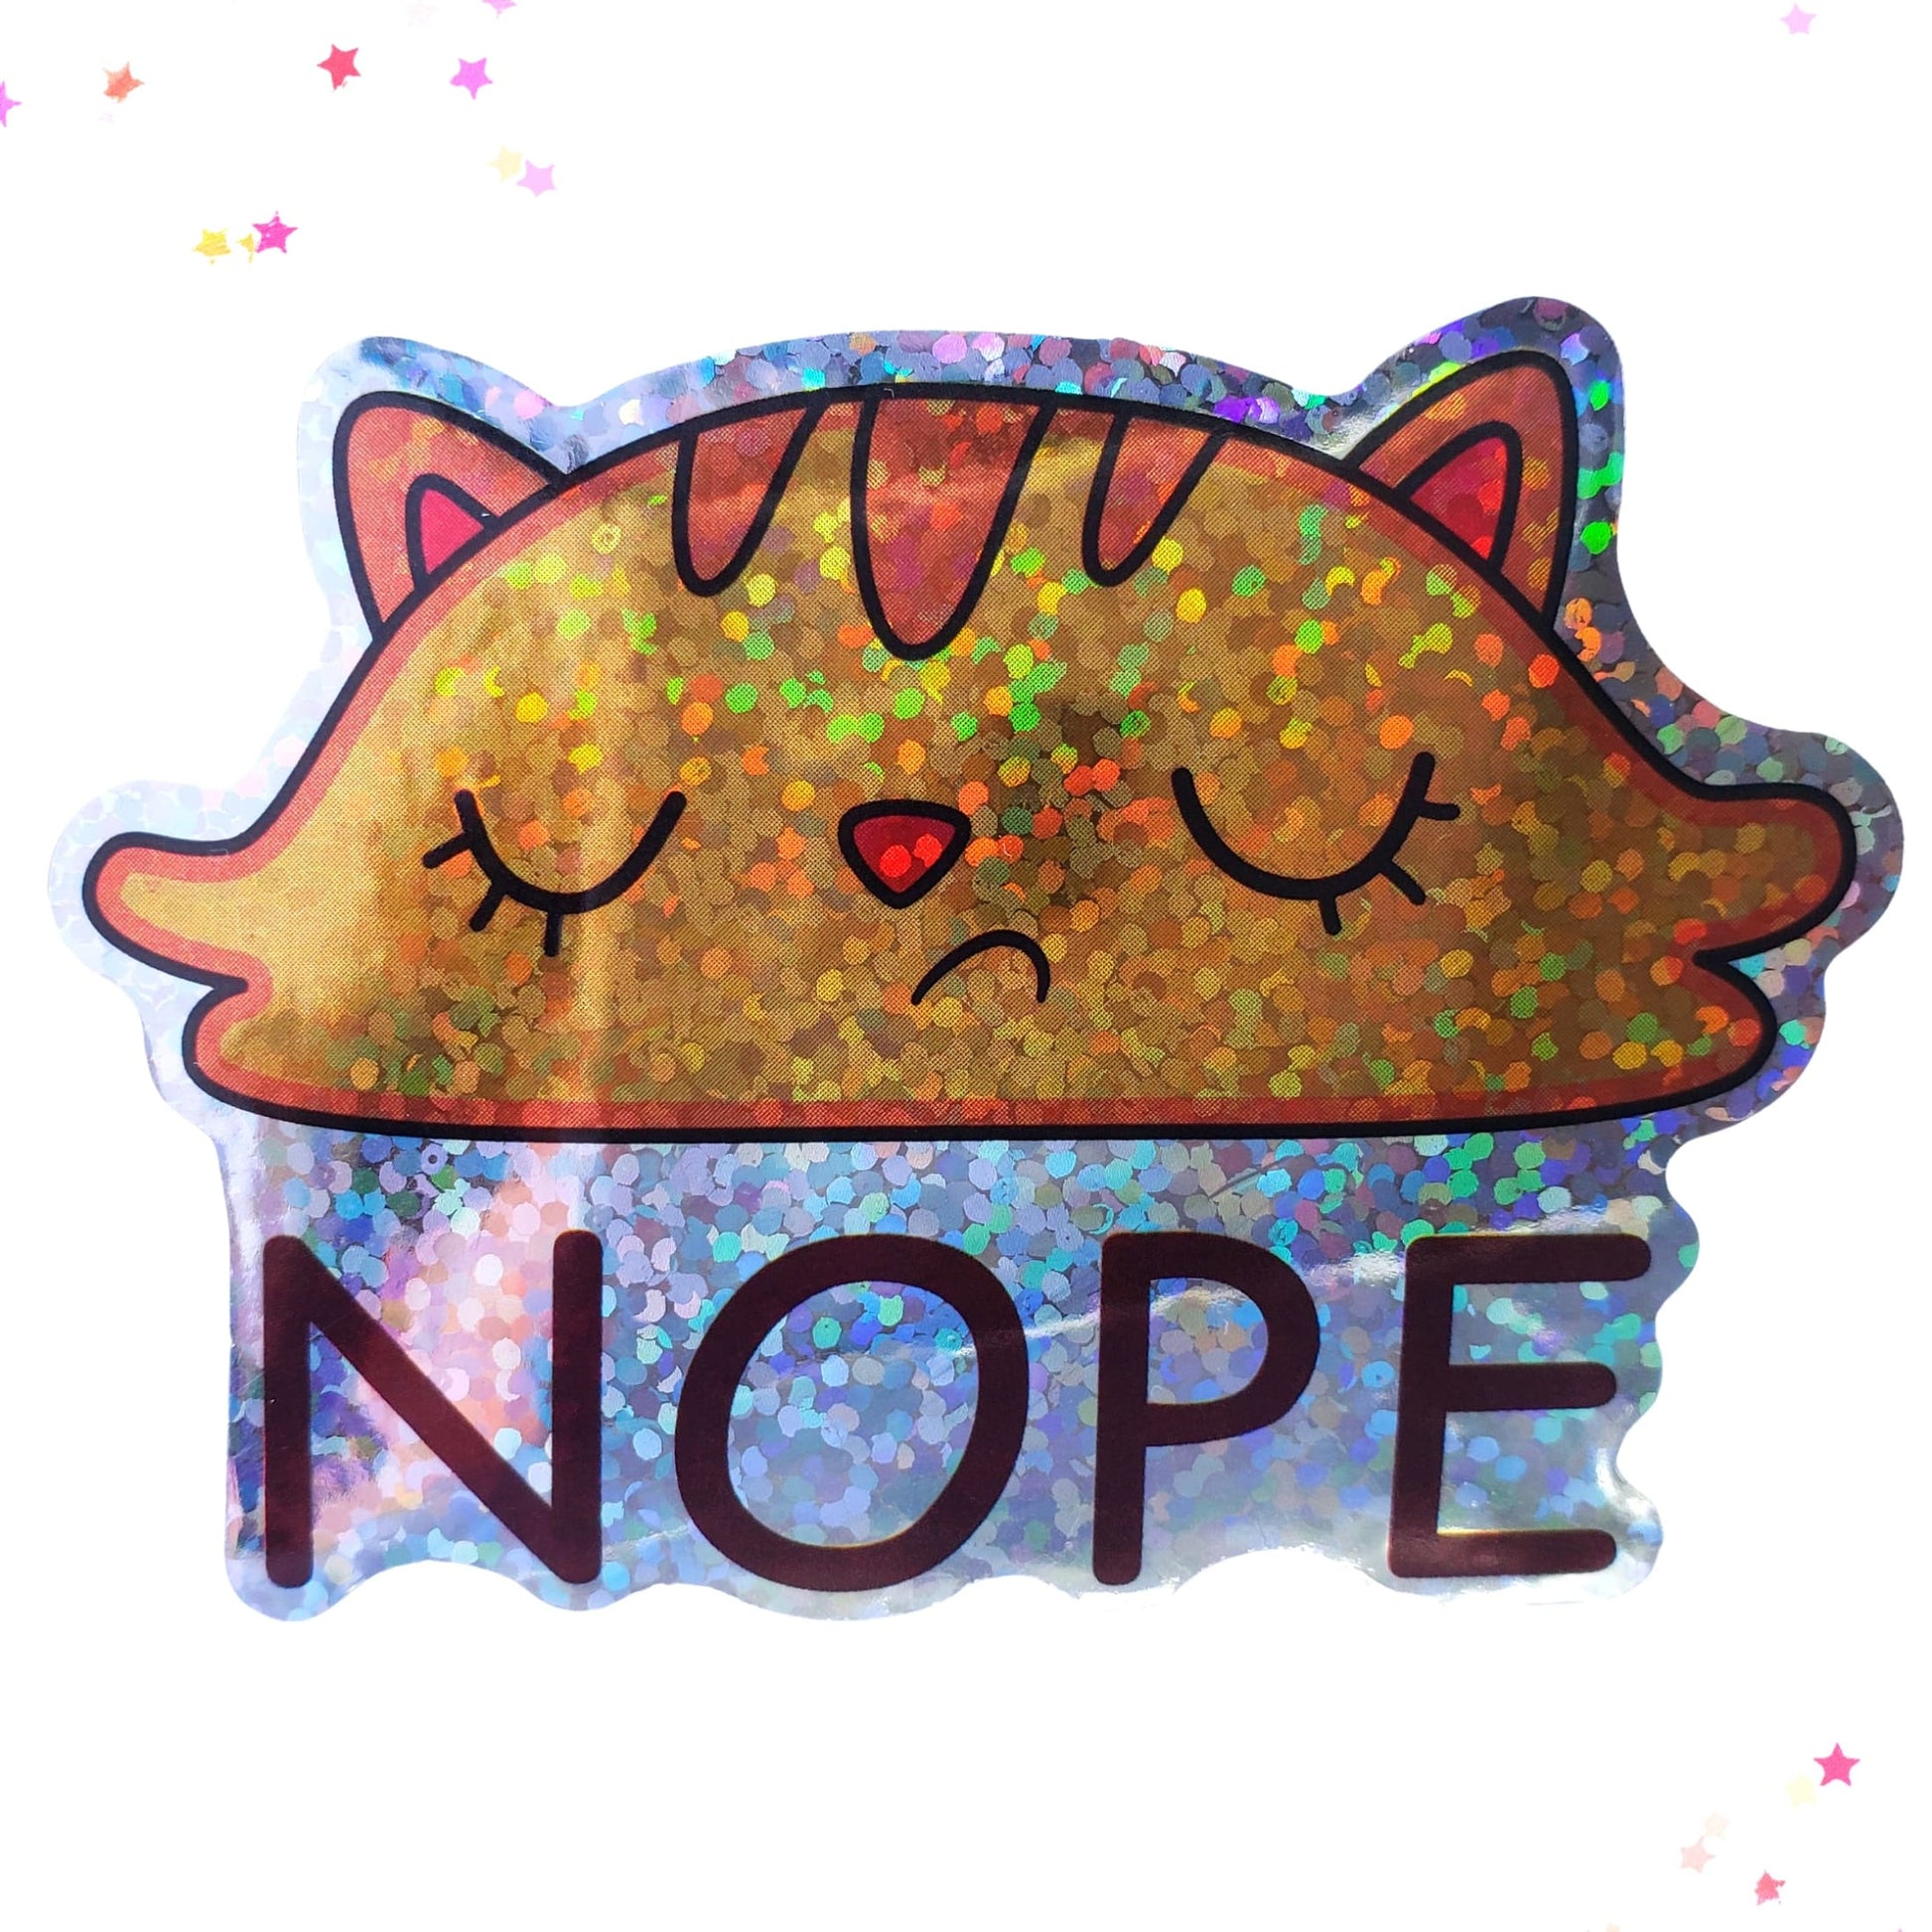 Premium Sticker - Sparkly Holographic Glitter Attitude Cat from Confetti Kitty, Only 2.0